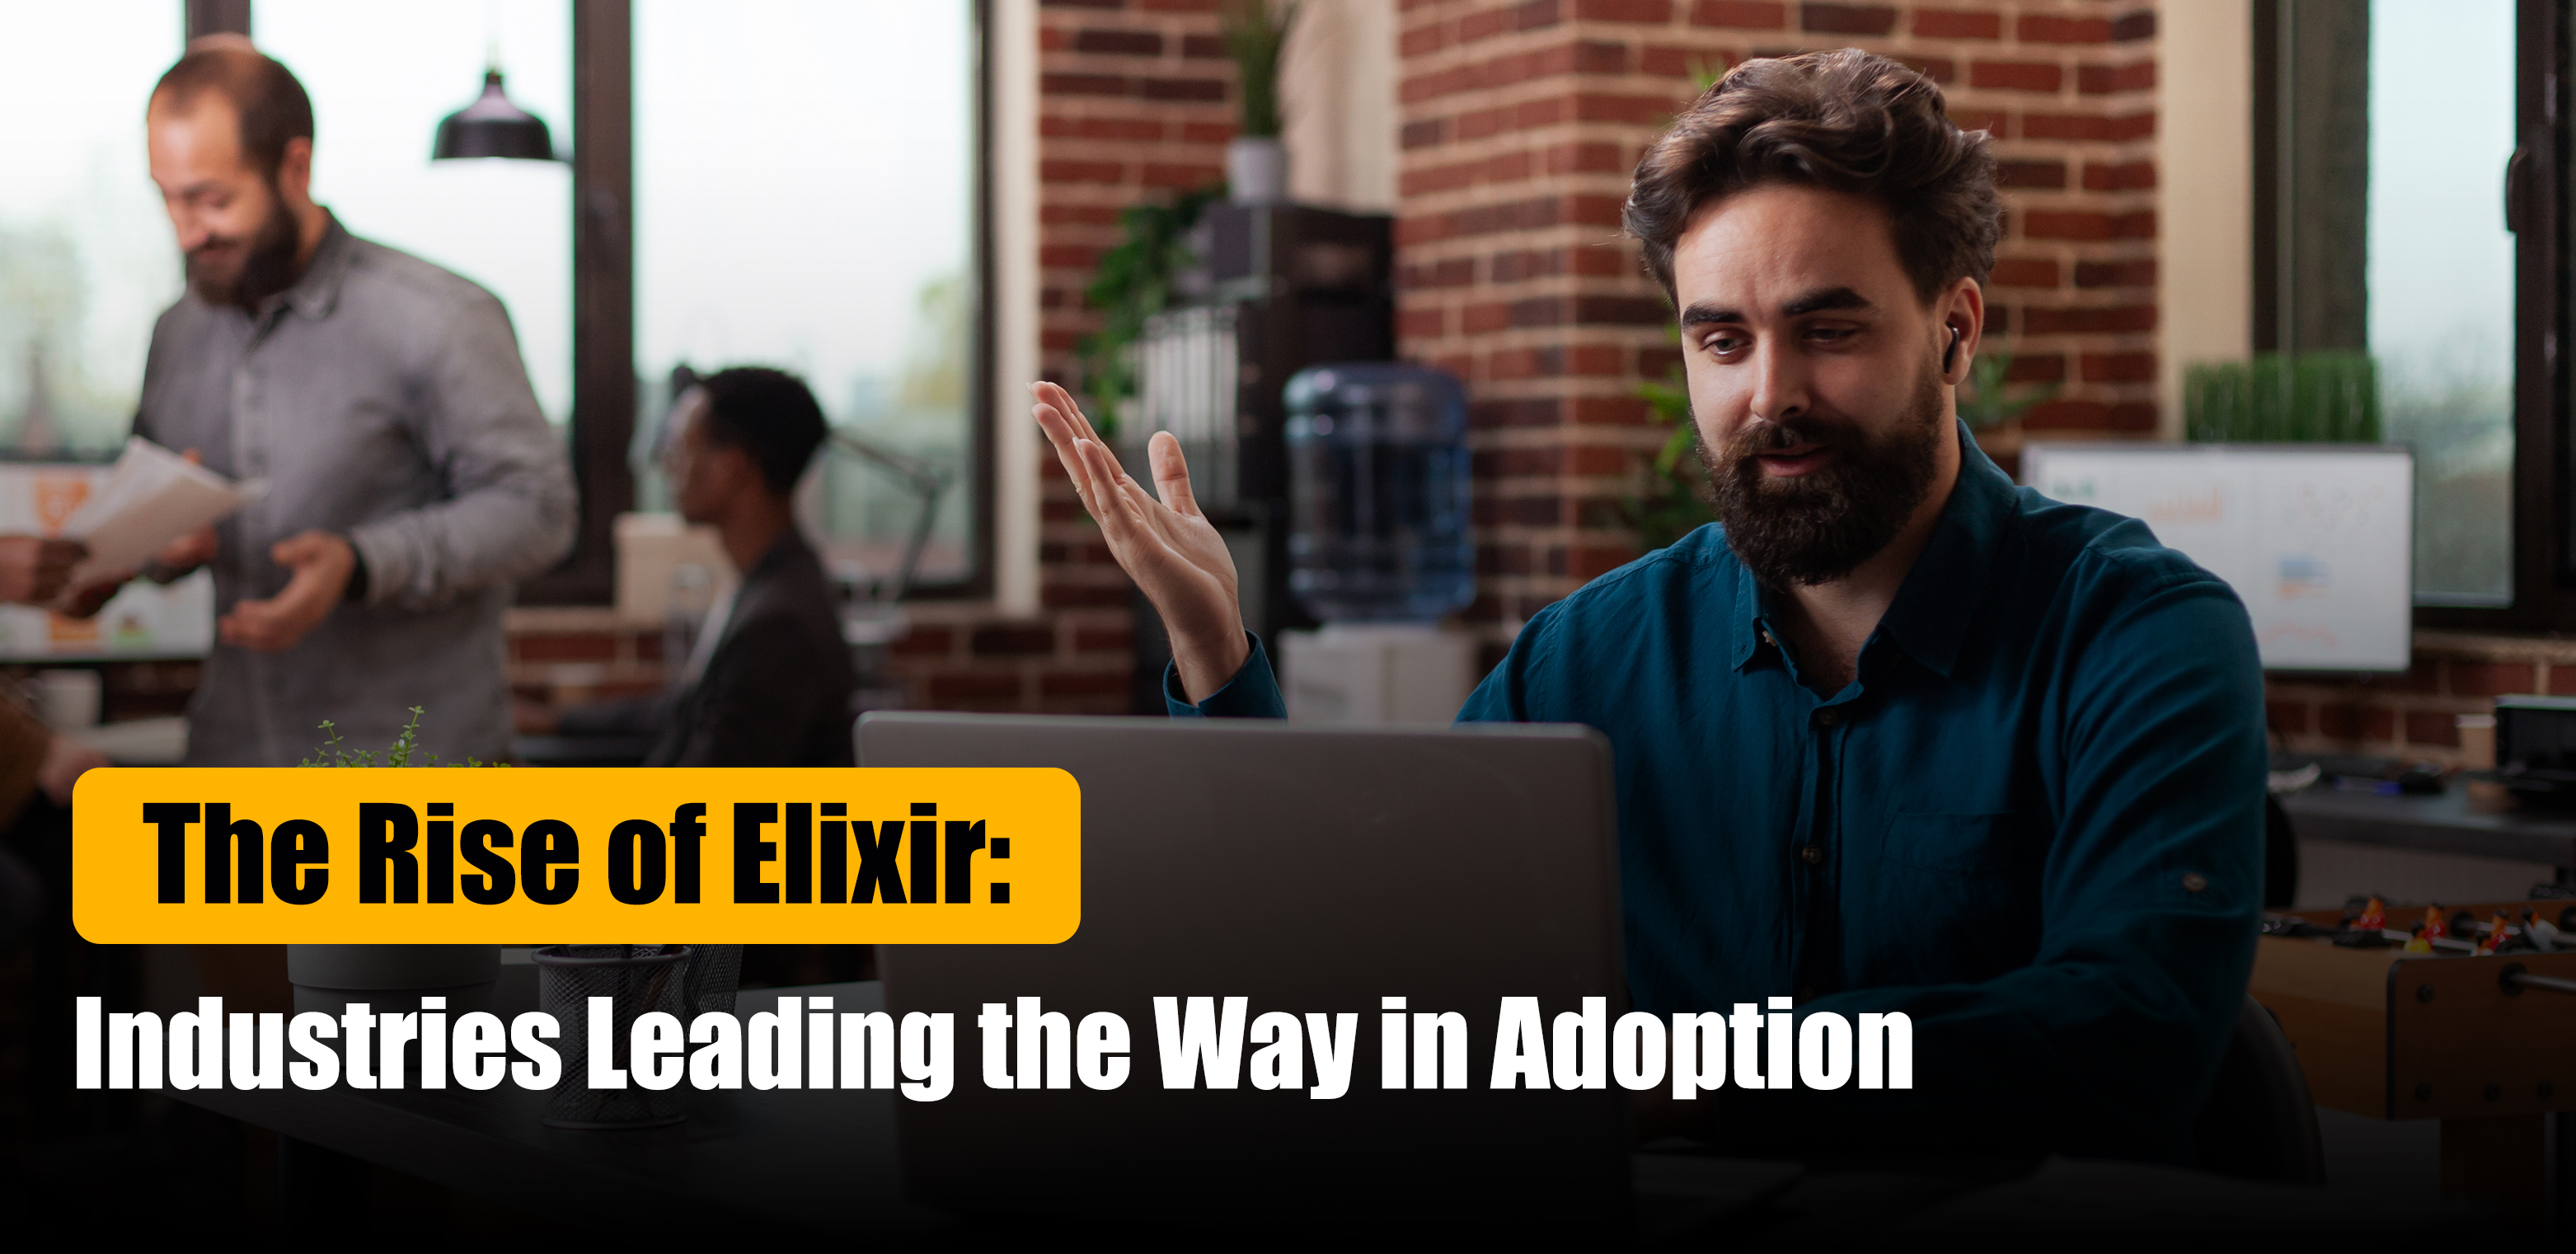 The Rise of Elixir Technology: Industries Leading the Way in Adoption